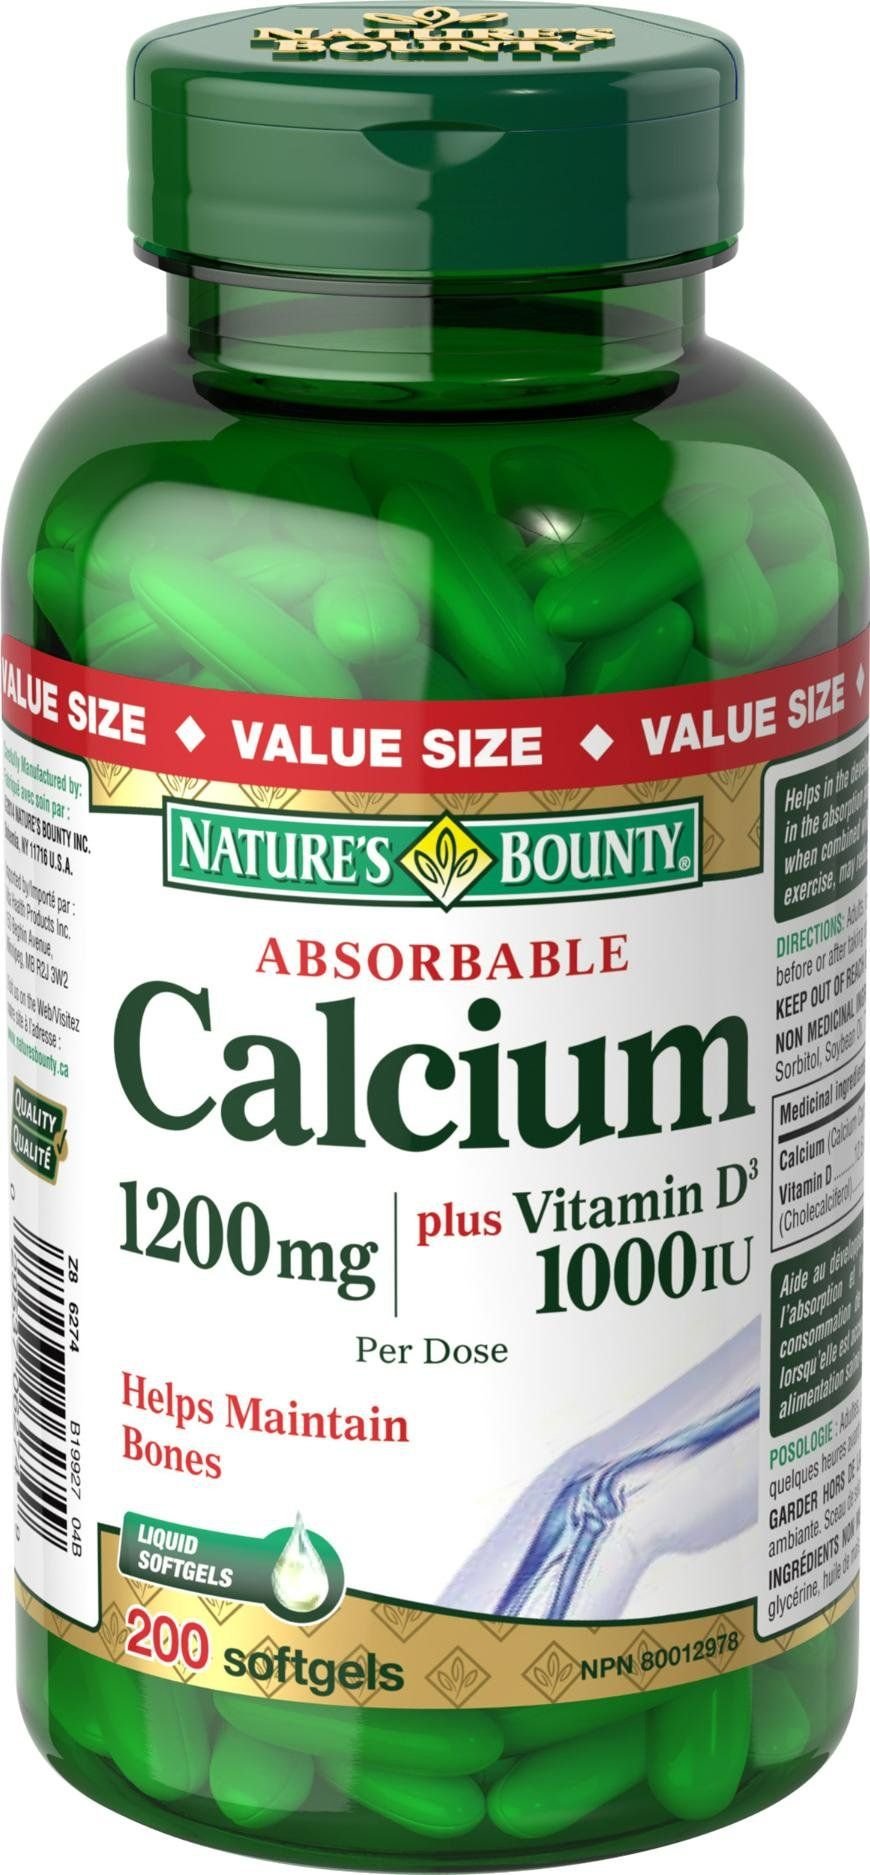 Natures Bounty Absorbable Calcium Plus Vitamin D3 1200 Mg 200 Softgels 6597